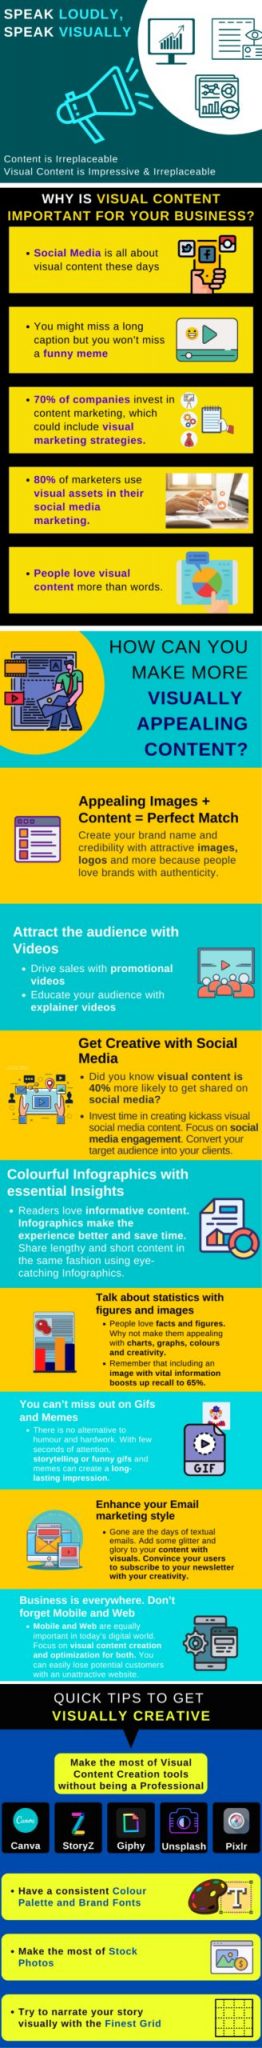 Making Infographics for visually appealing content